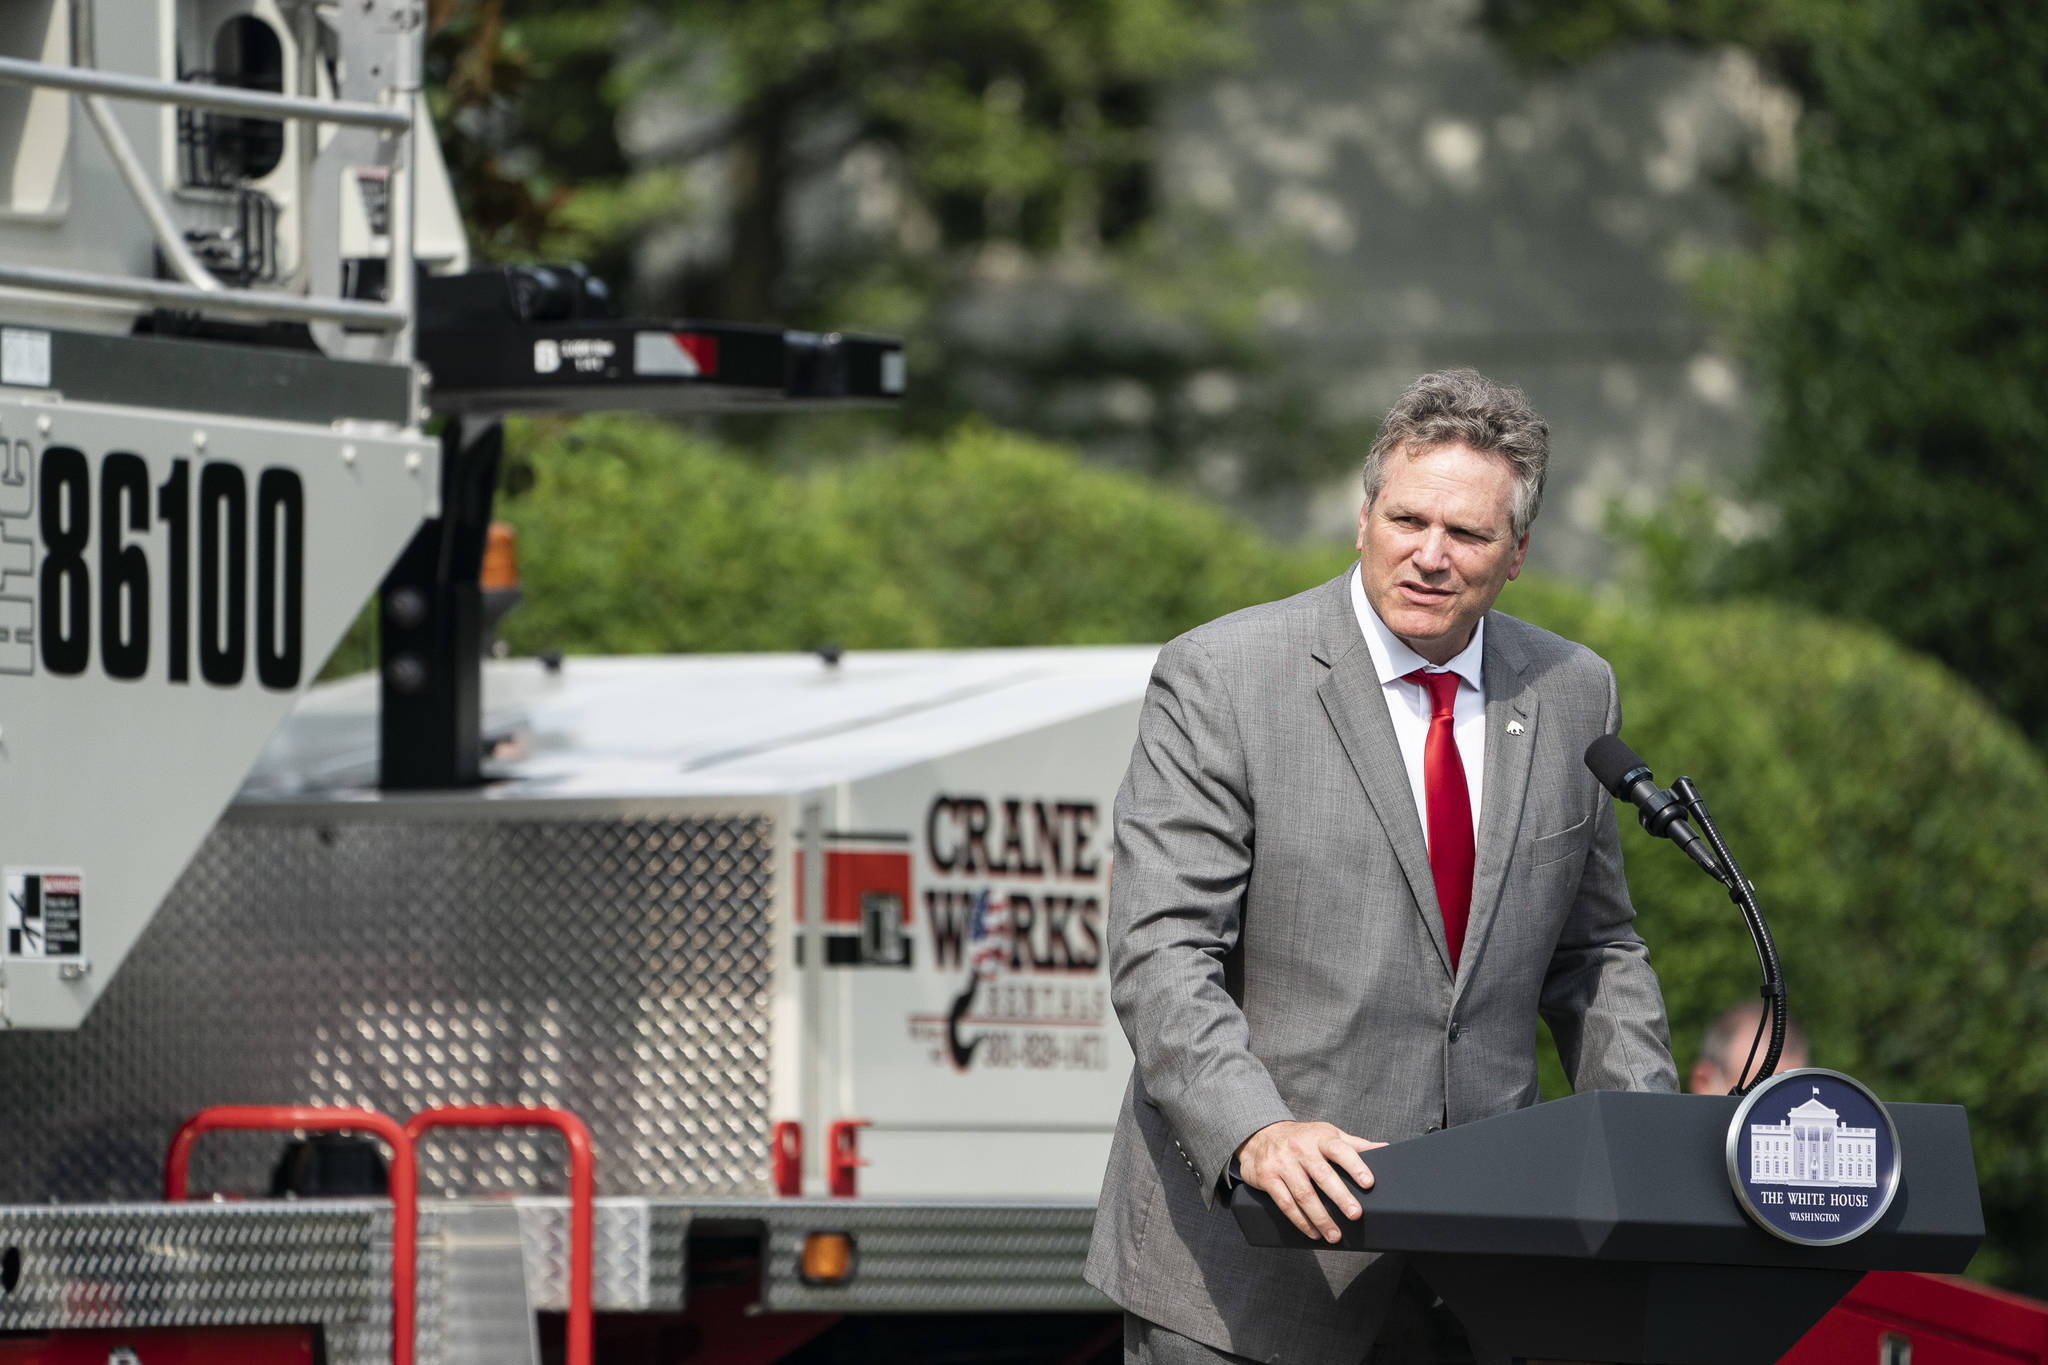 Alaska Gov. Mike Dunleavy delivers remarks at the Rolling Back Regulations to Help All Americans event Thursday, July 16, 2020, on the South Lawn of the White House. (Official White House Photo | Joyce N. Boghosian)